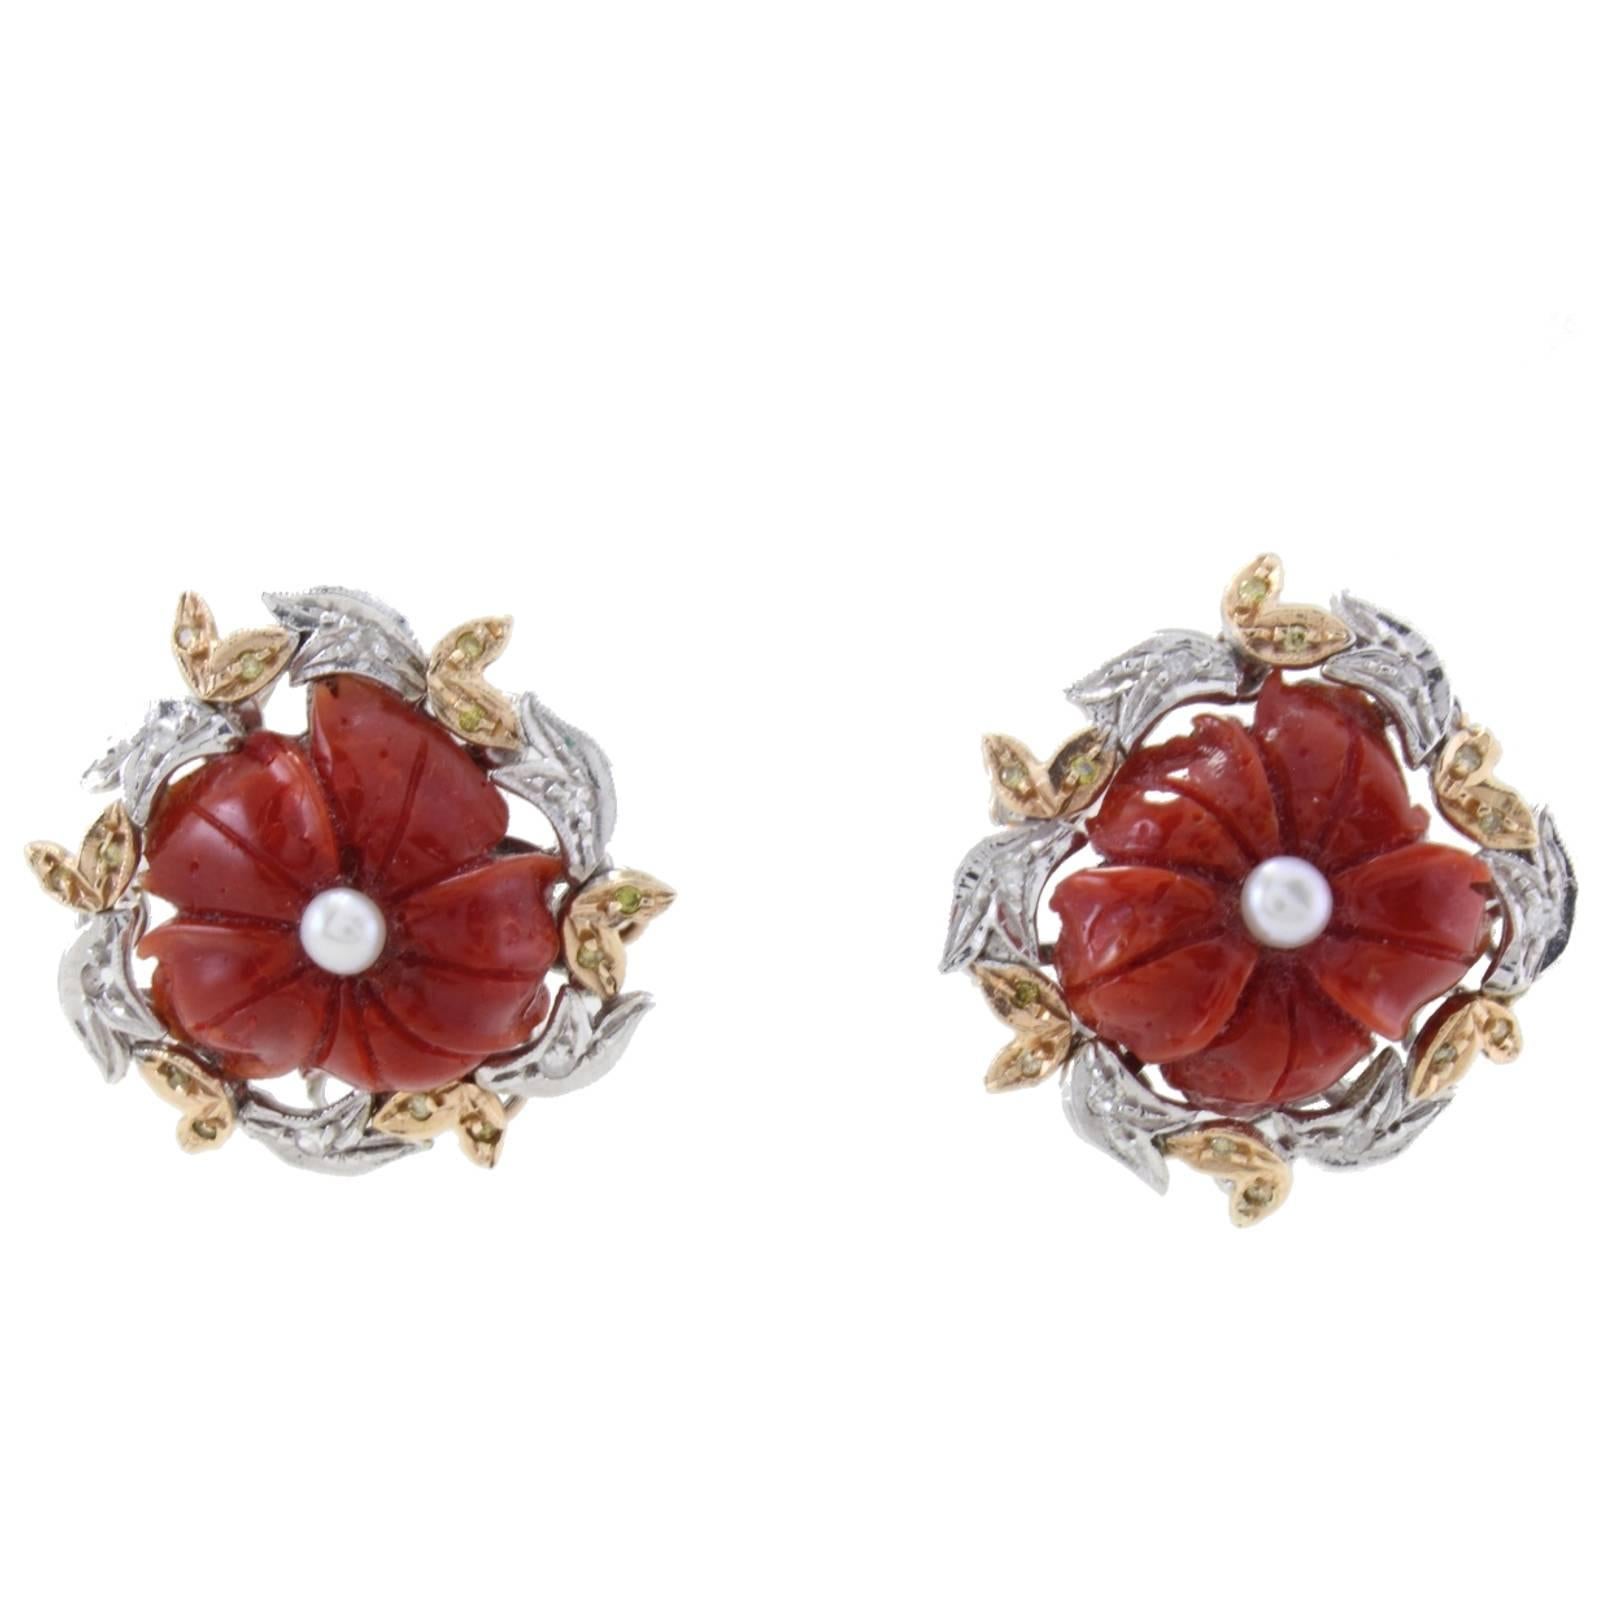  Diamonds Coral Pearls Clip-On  Gold Earrings